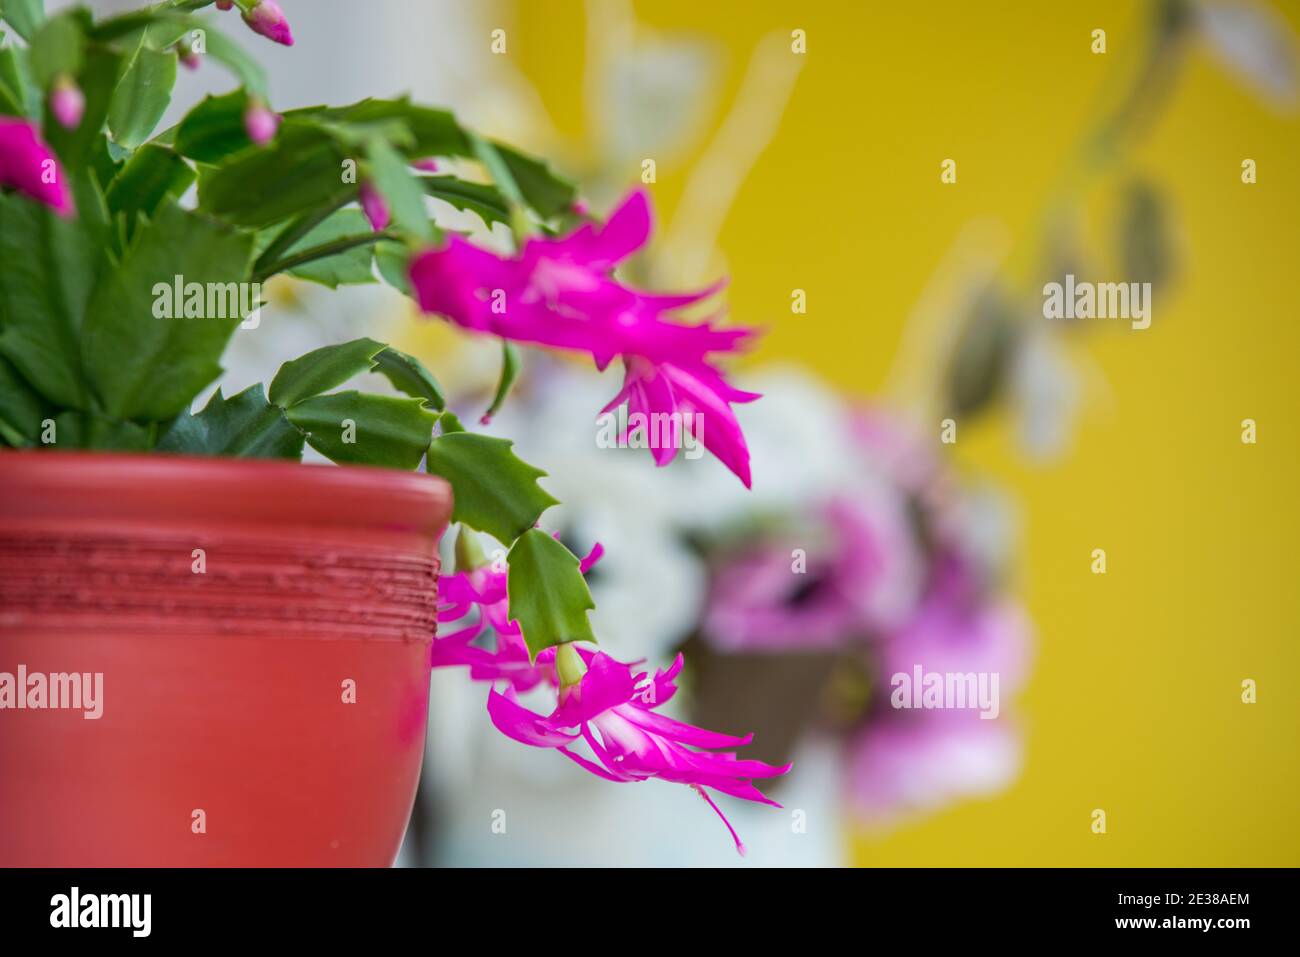 Blooming schlumbergera also called Christmas cactus or crab cactus Stock Photo